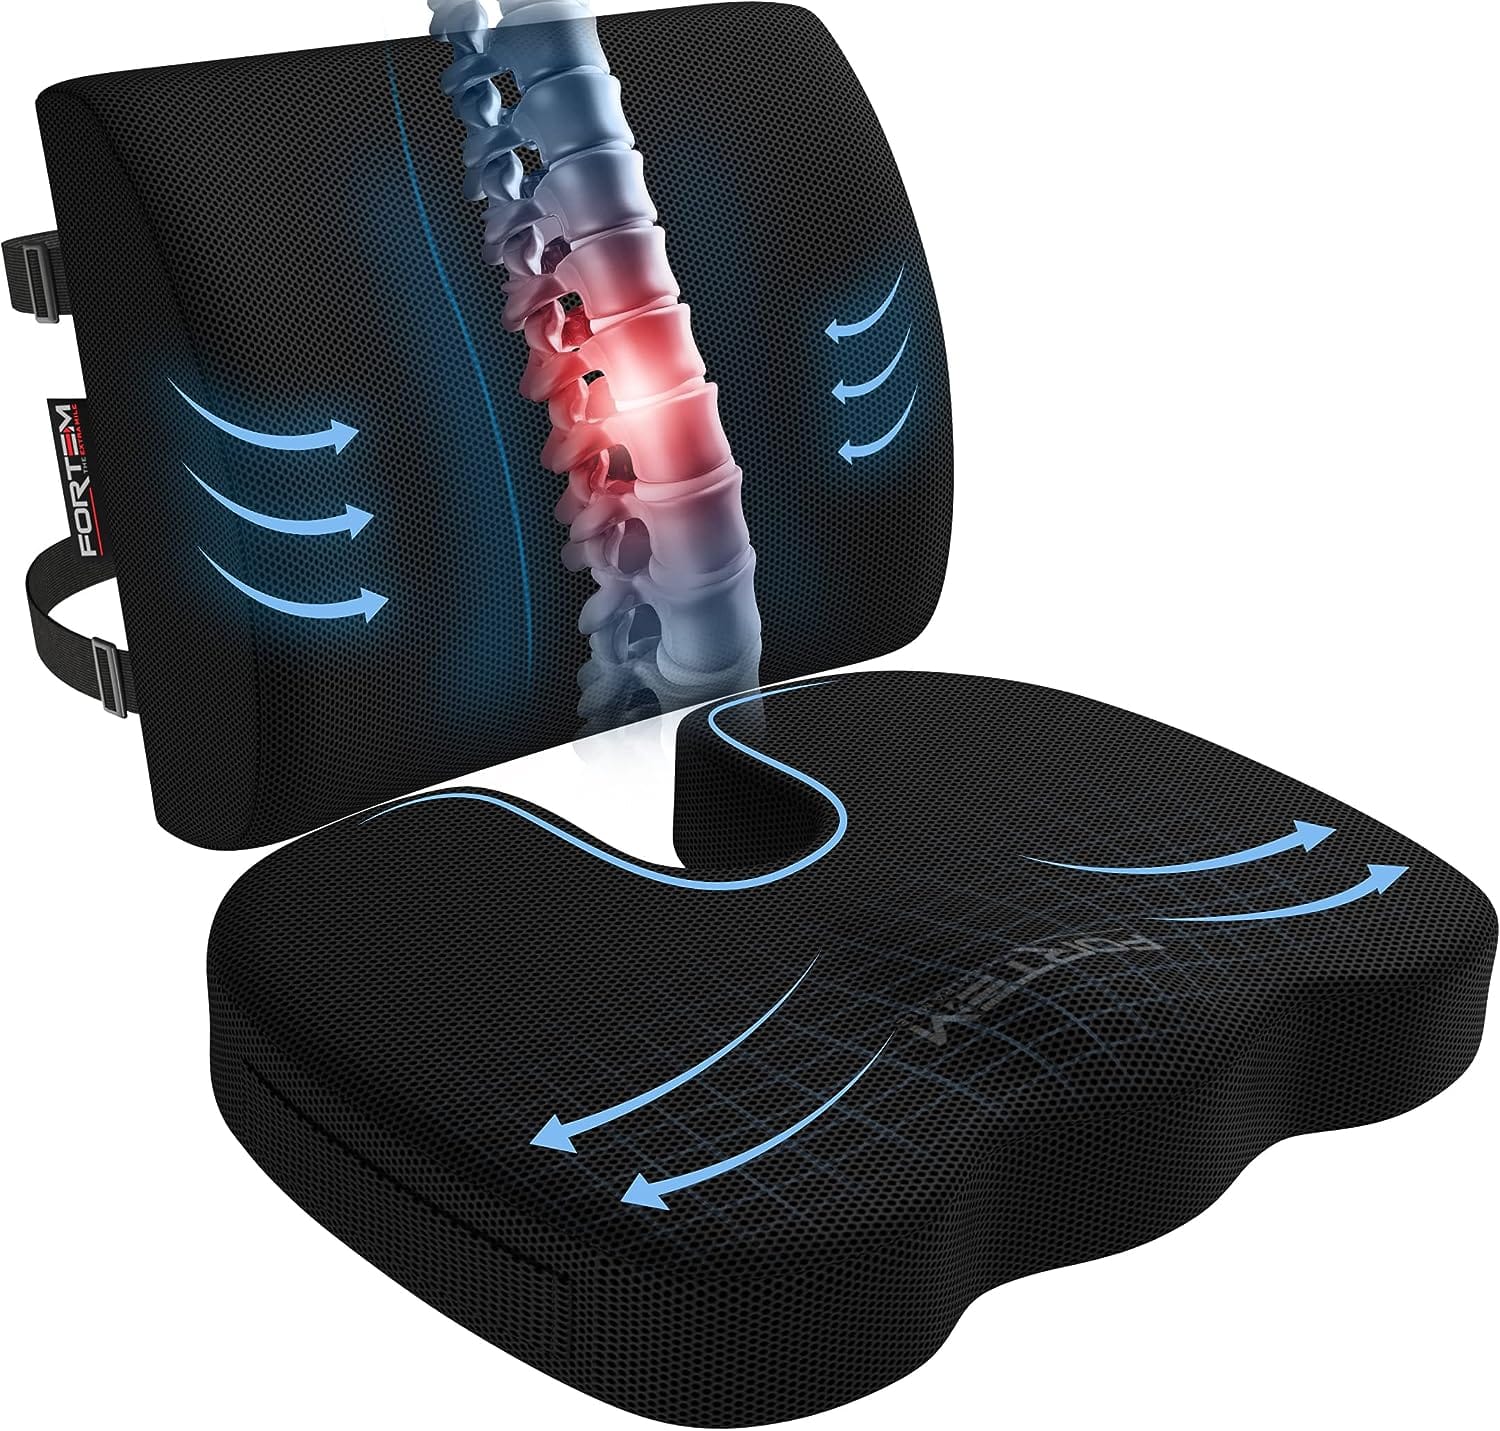 Best Seat Cushion For Lower Back Pain